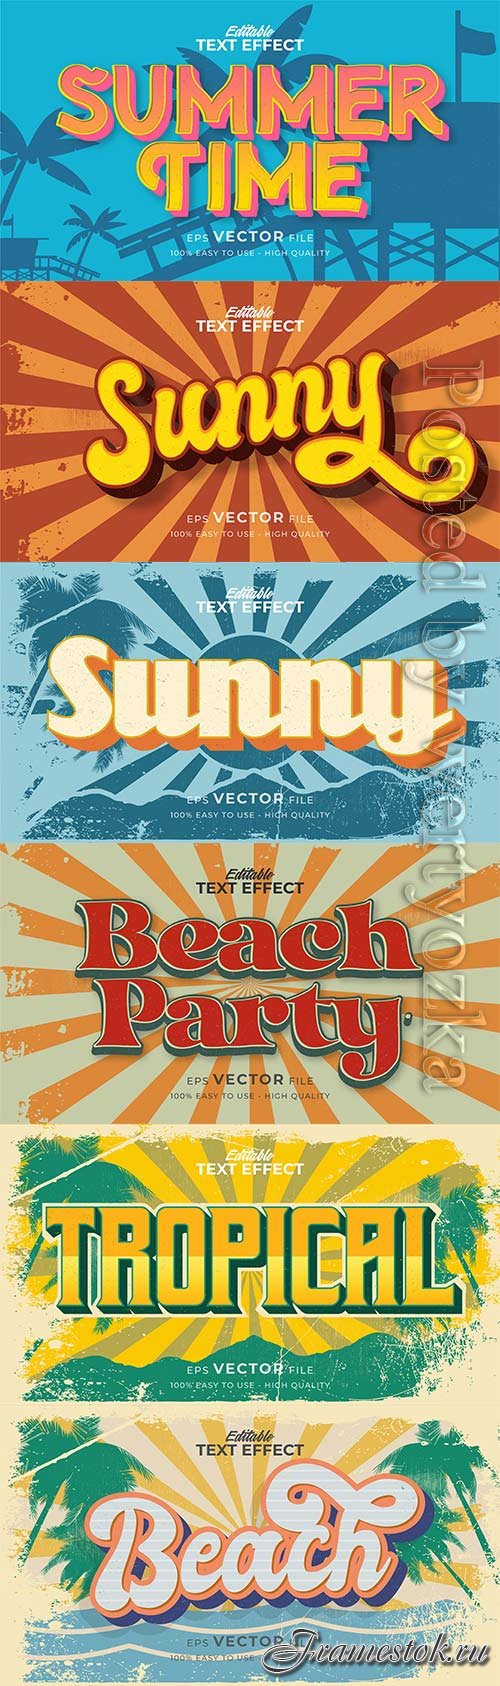 Text style effect, retro summer text in grunge style vol 3